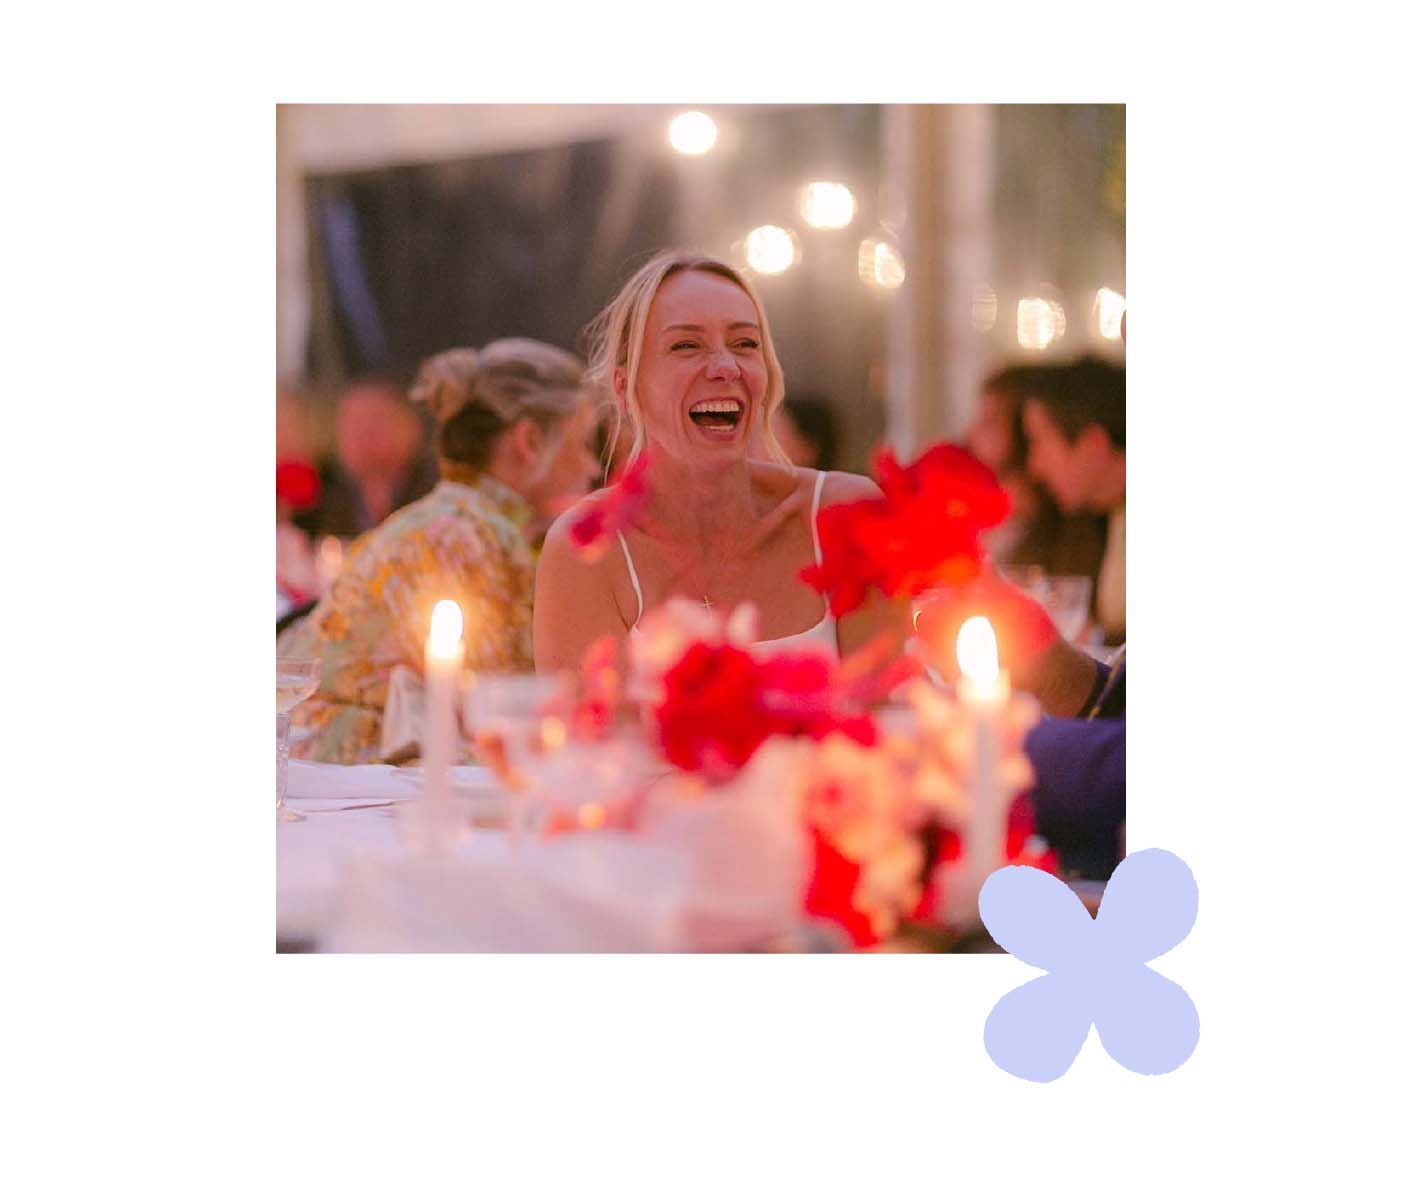 Woman laughing at table decorated with red flowers